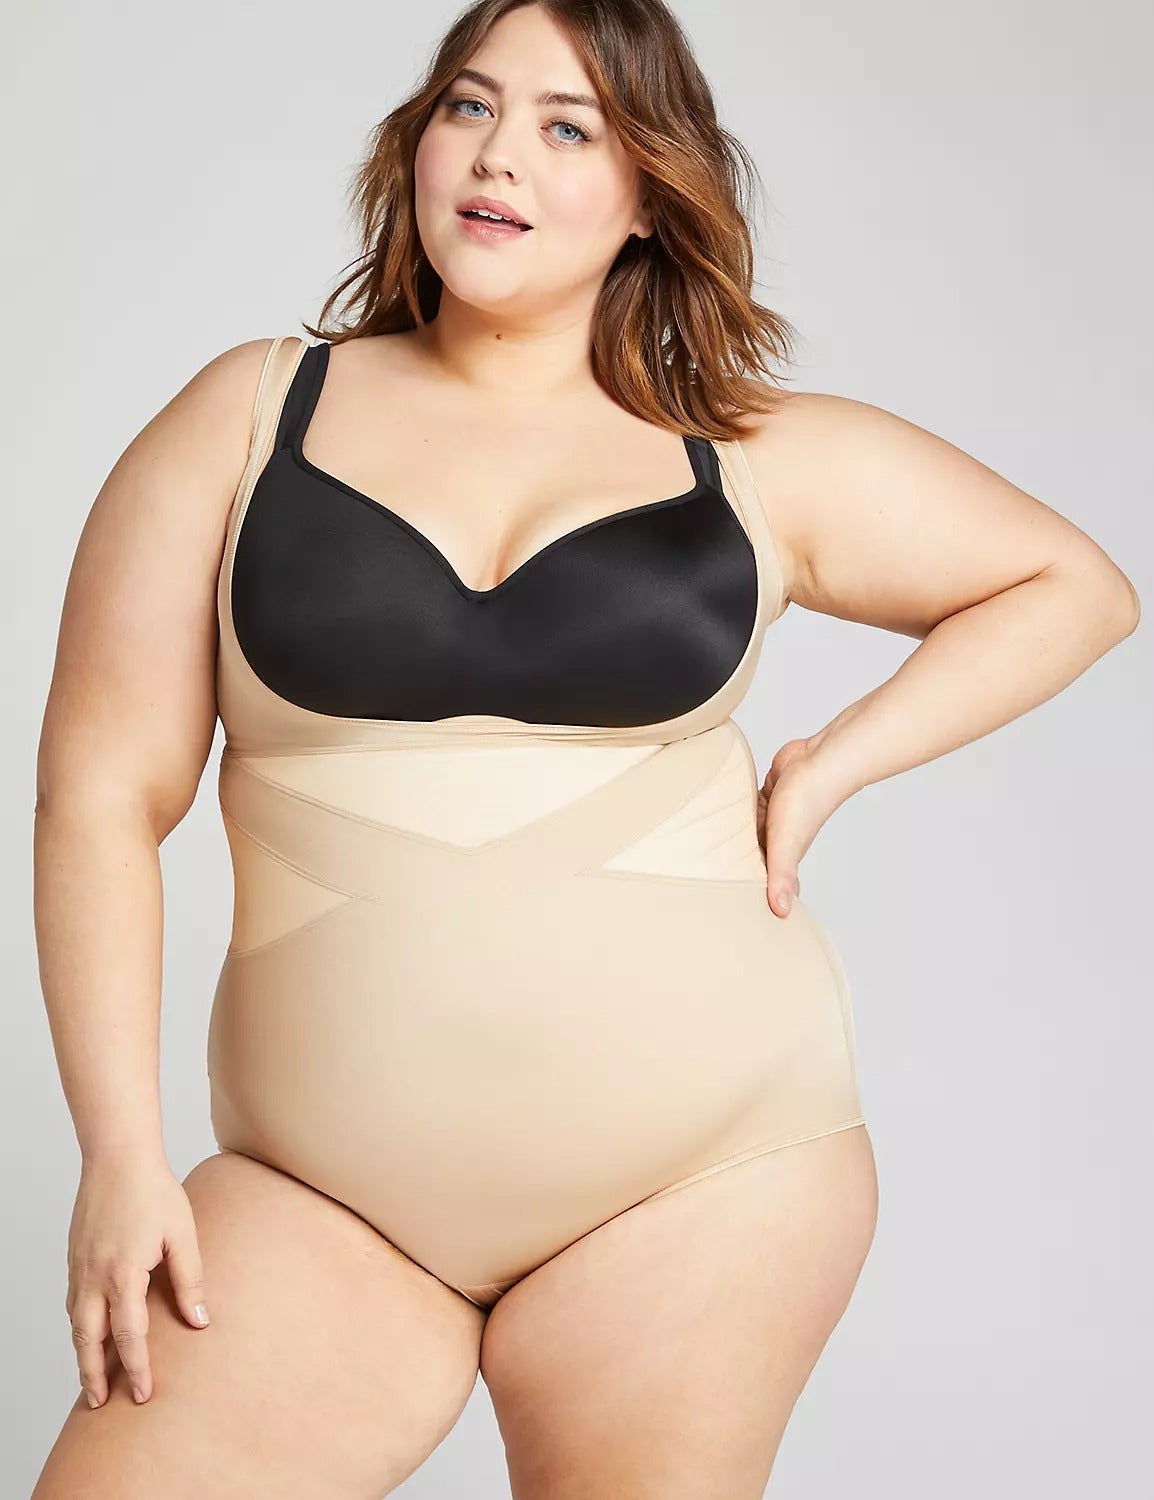 Can shapewear be more desirable than a G-string?